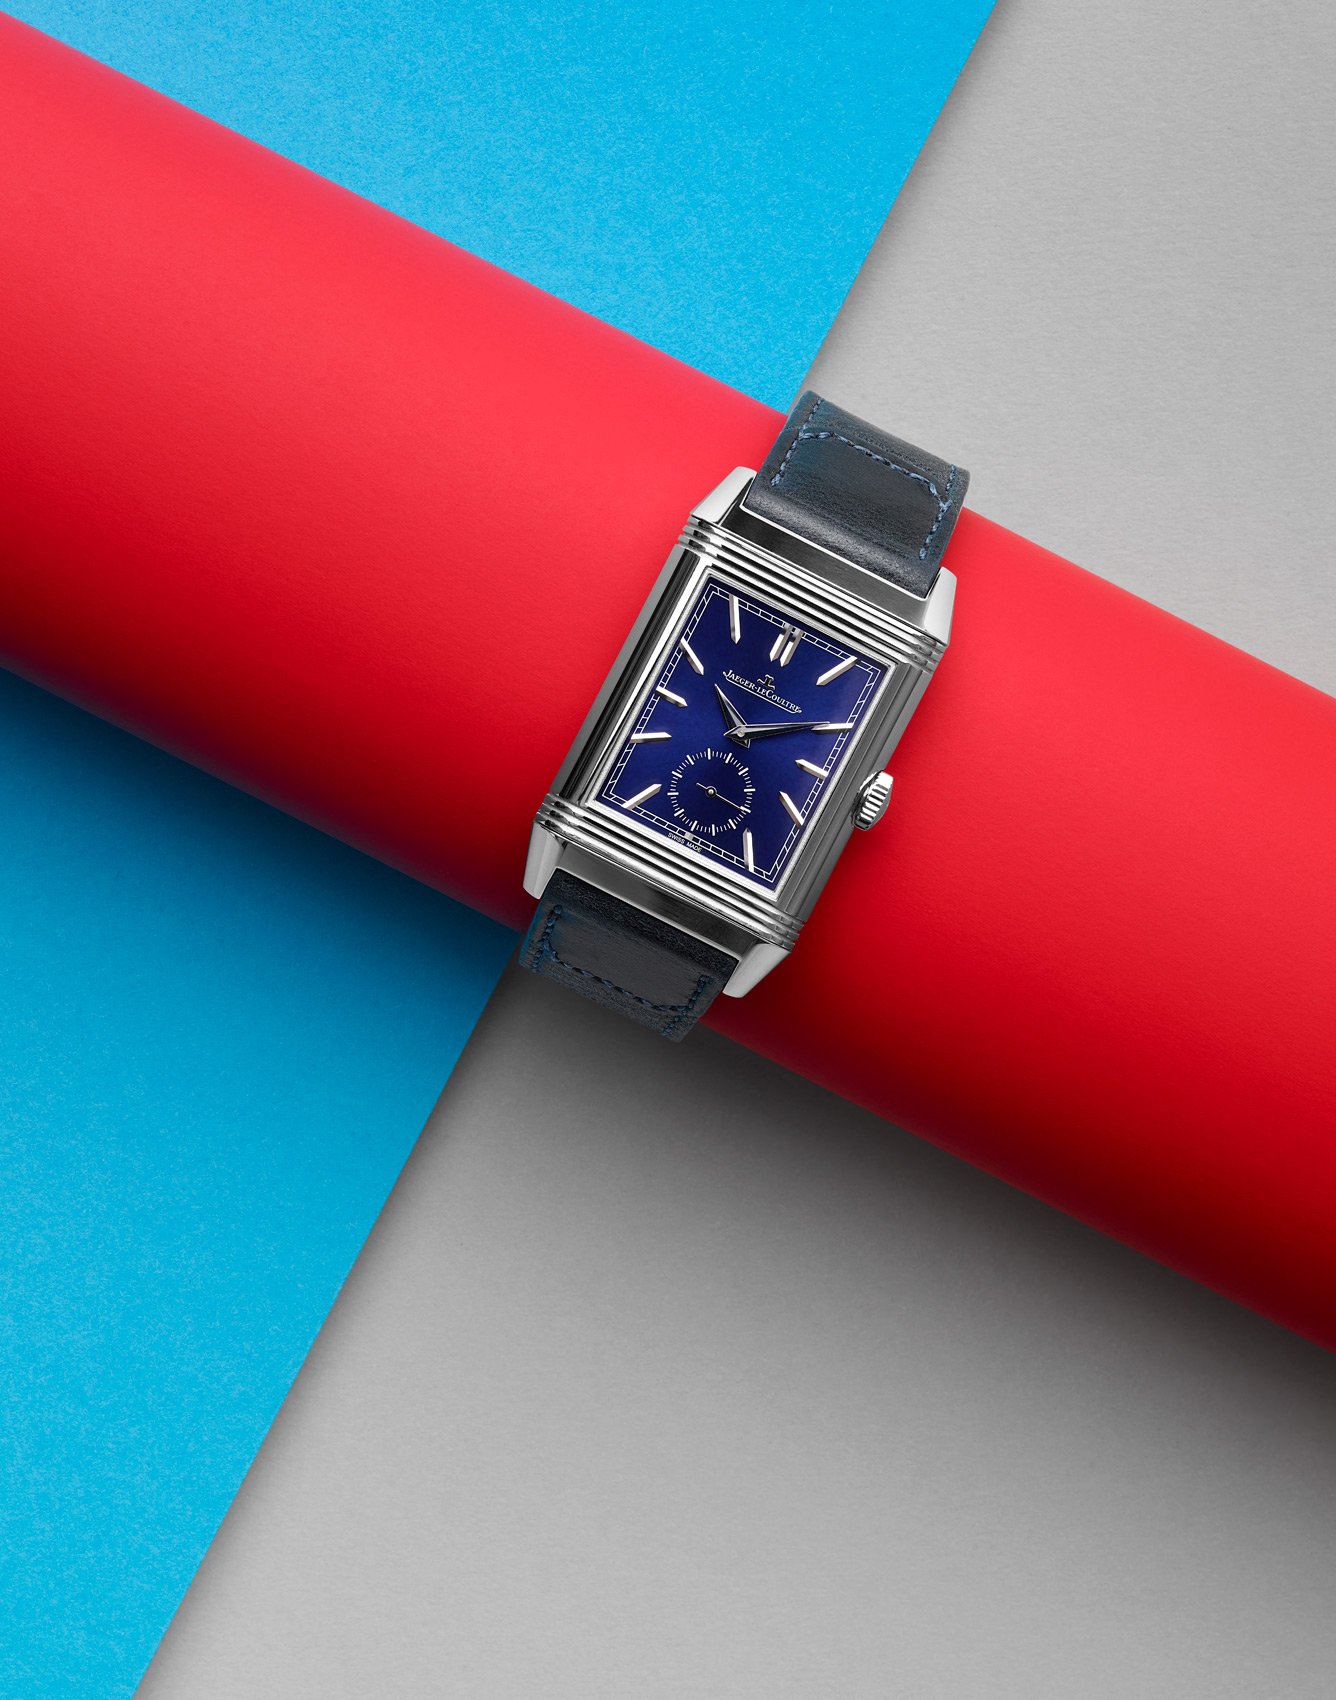 Conceptual watch photography by Alexander Kent London based still life and product photographer.